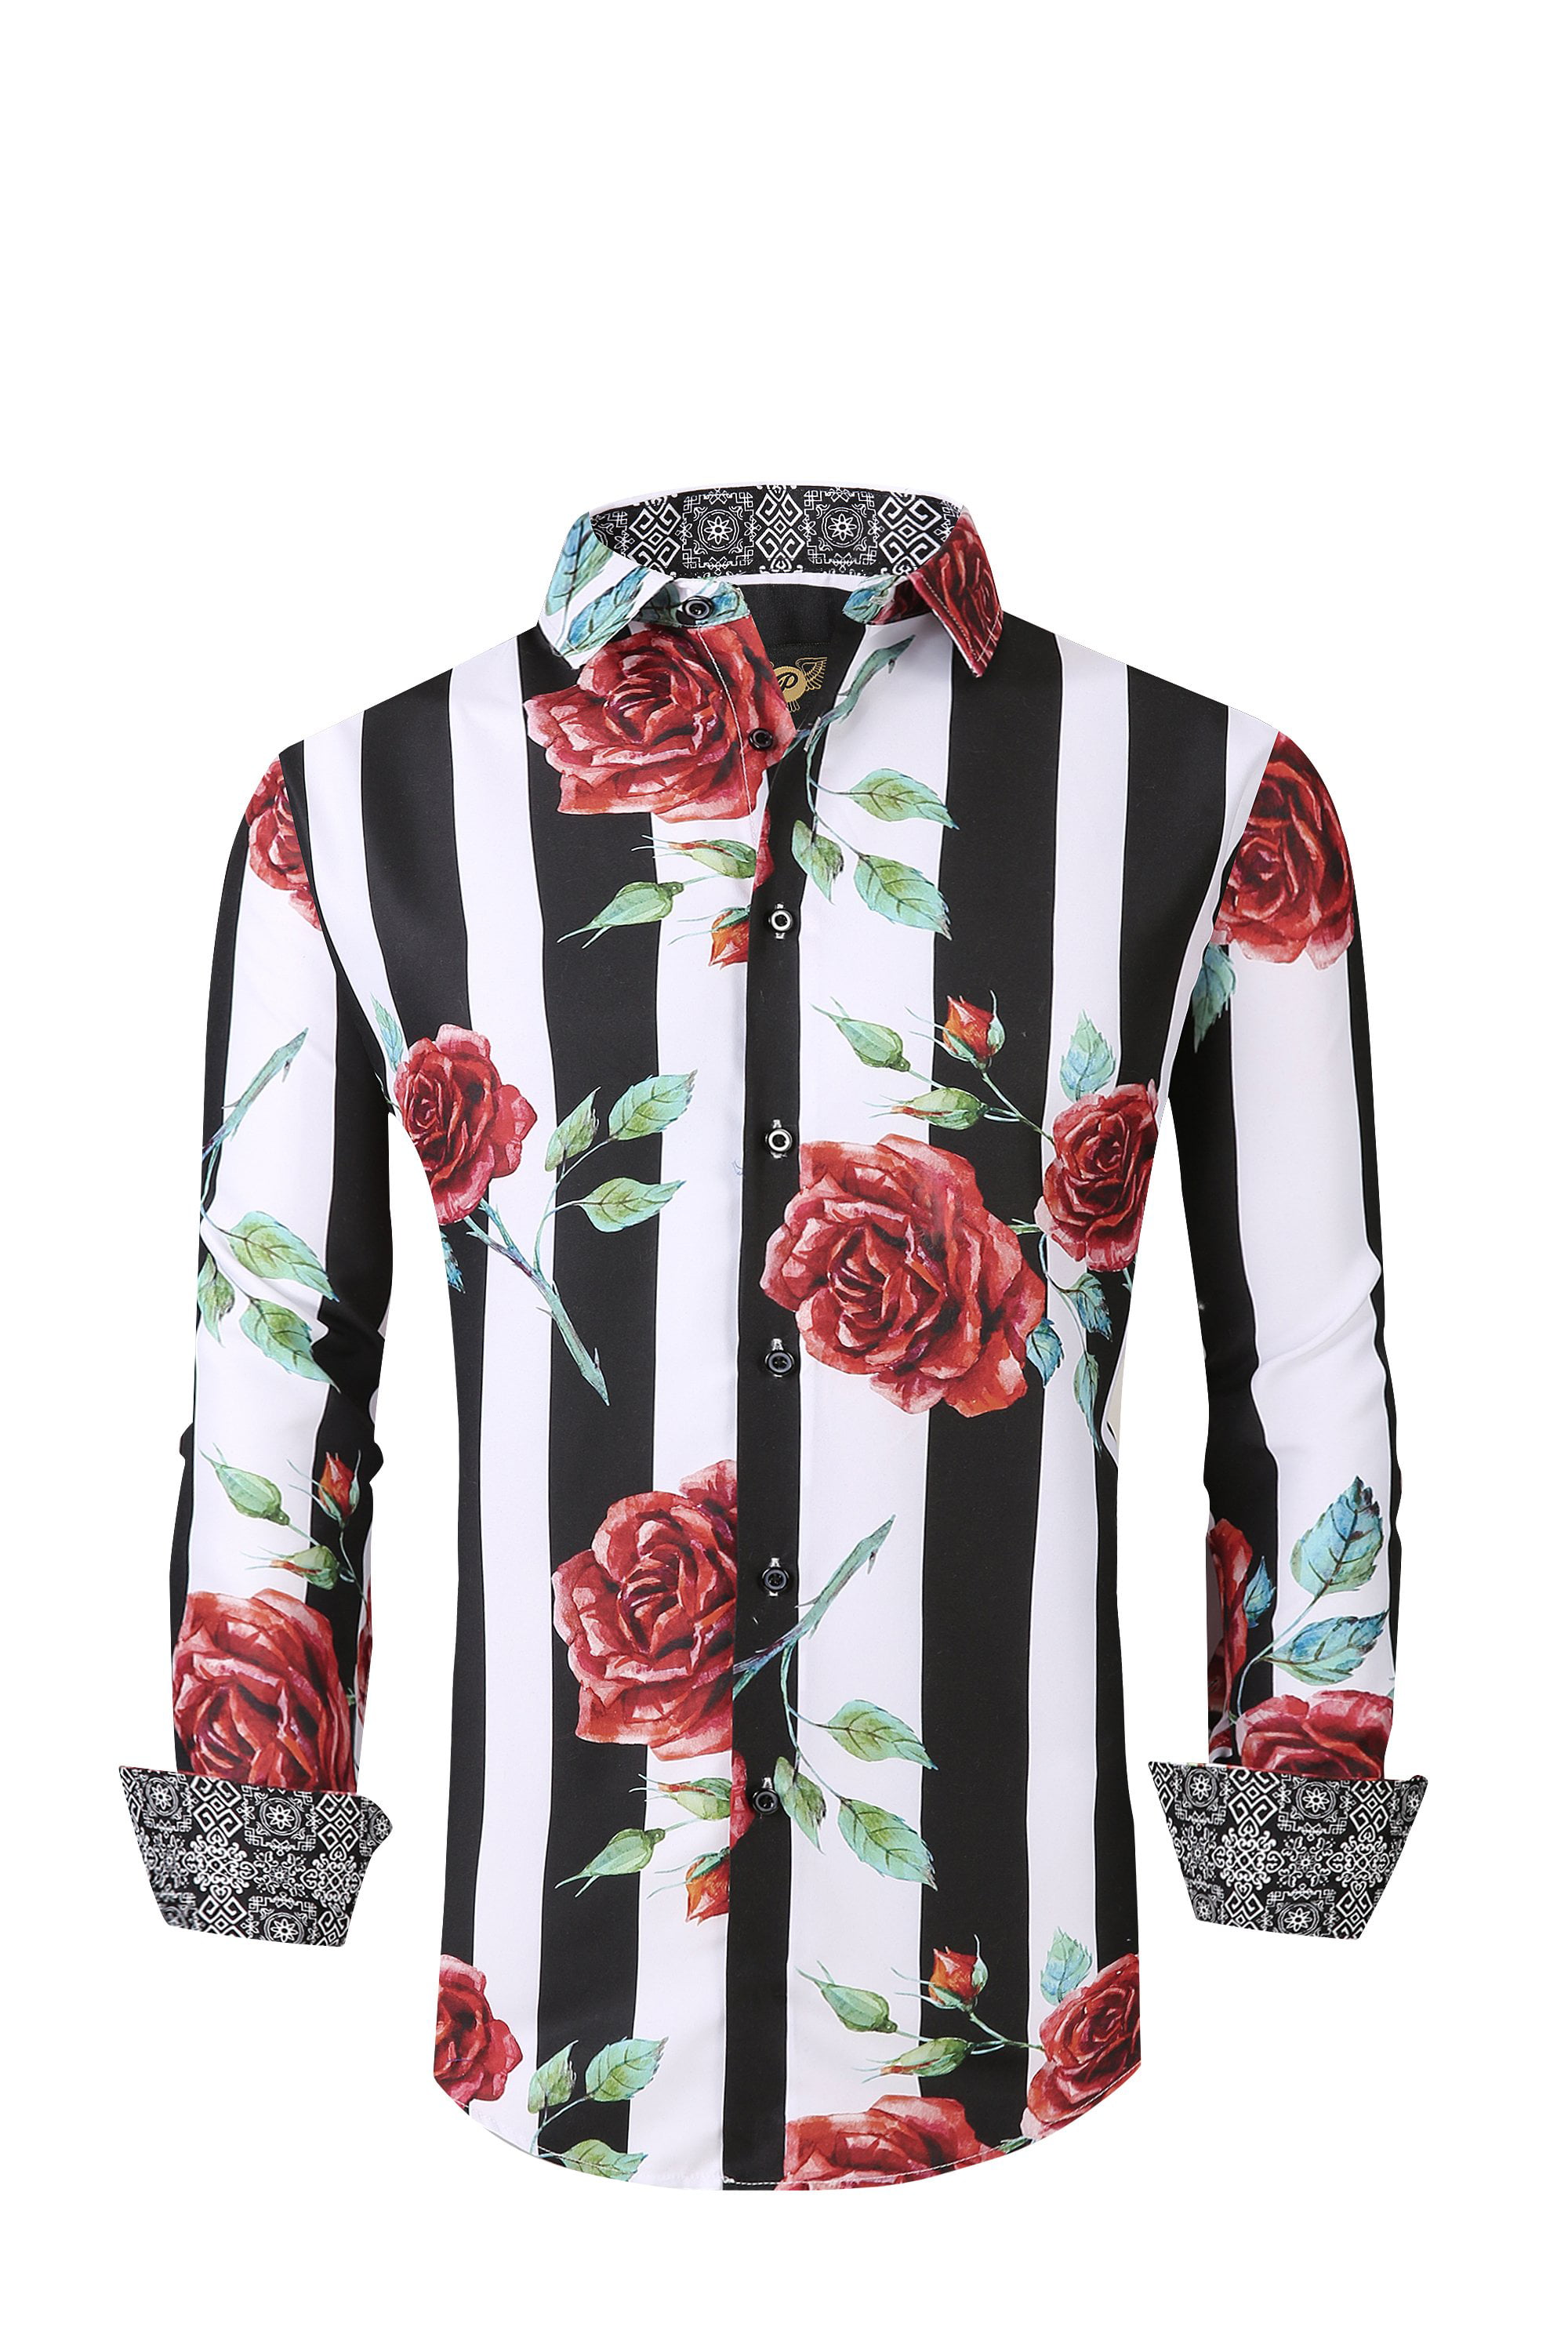 men's shirt with red roses